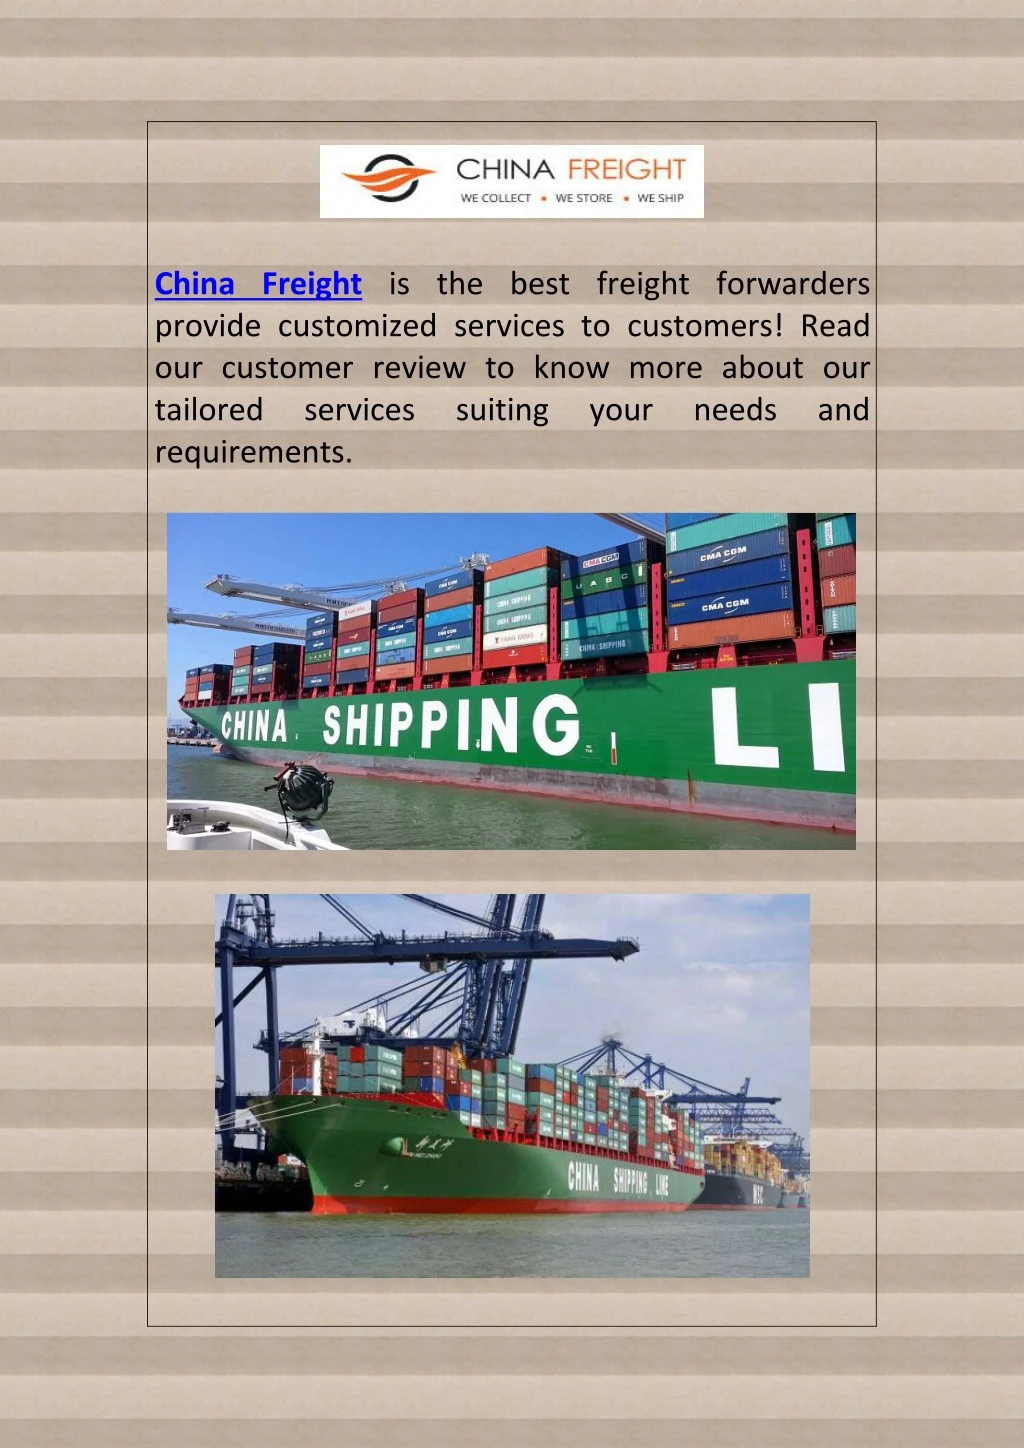 china freight is the best freight forwarders